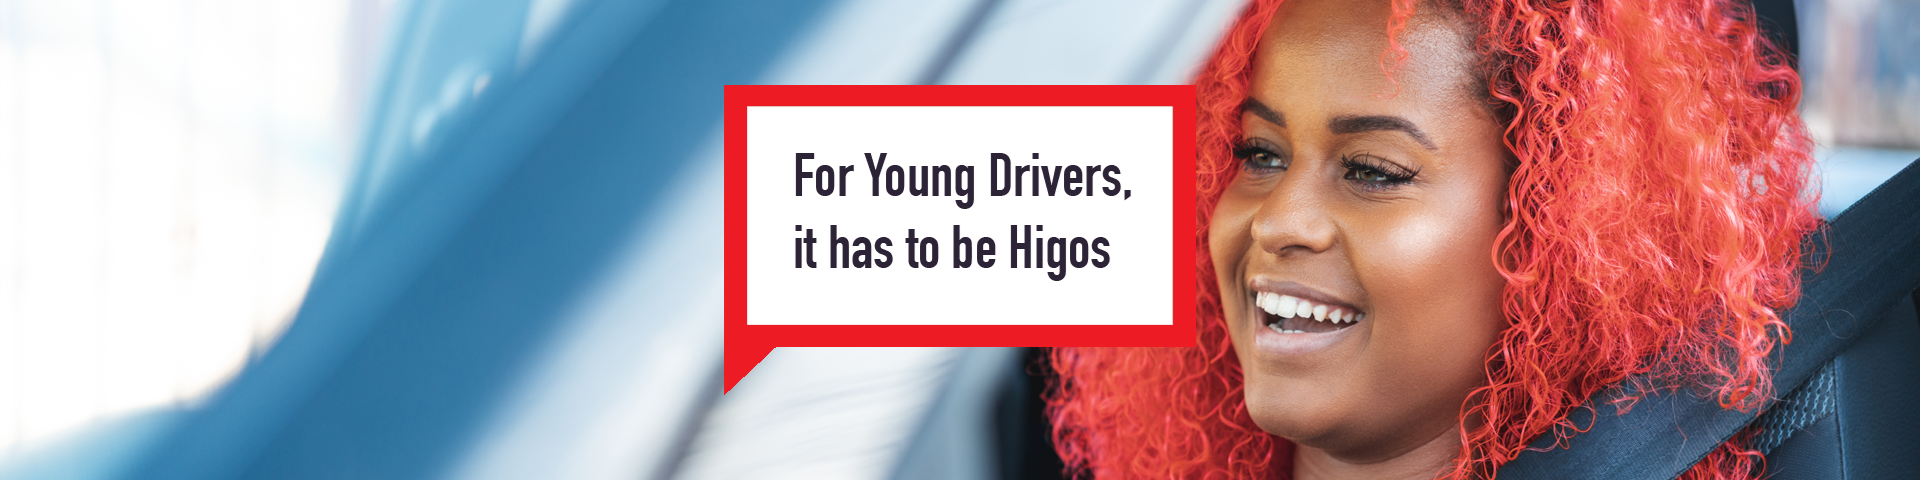 Higos Personal insurance young drivers